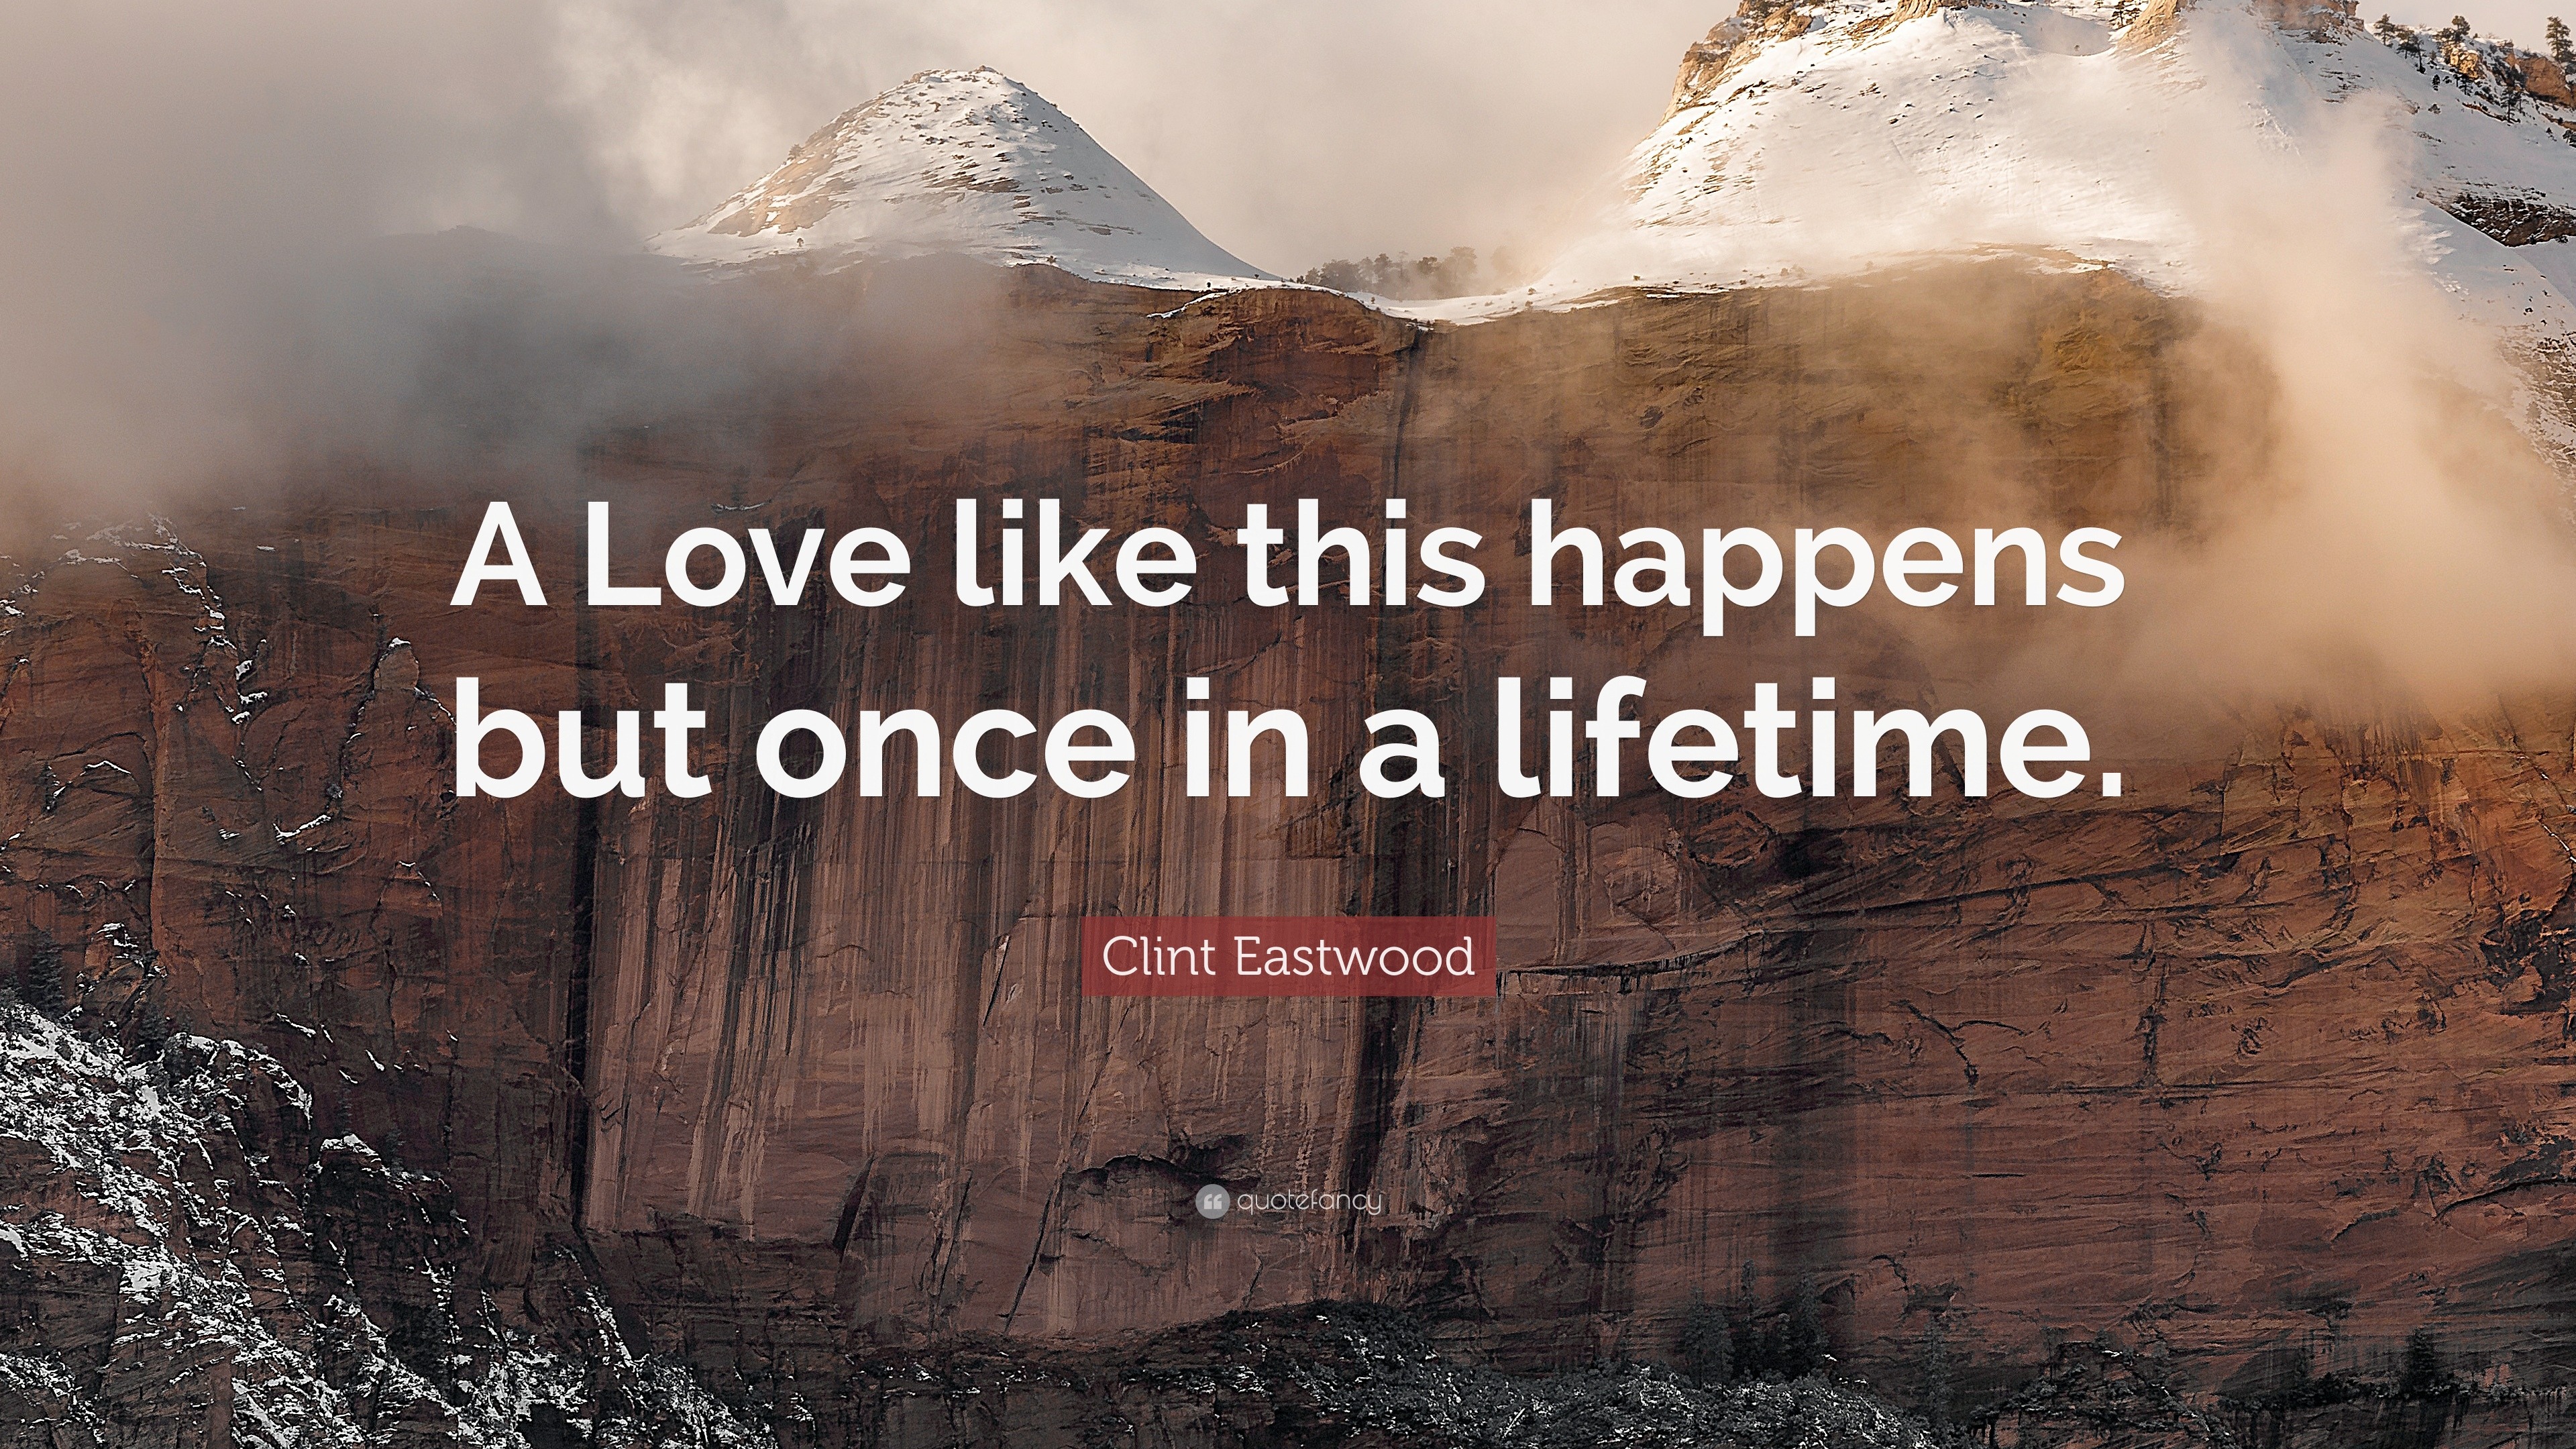 Clint Eastwood Quote “A Love like this happens but once in a lifetime